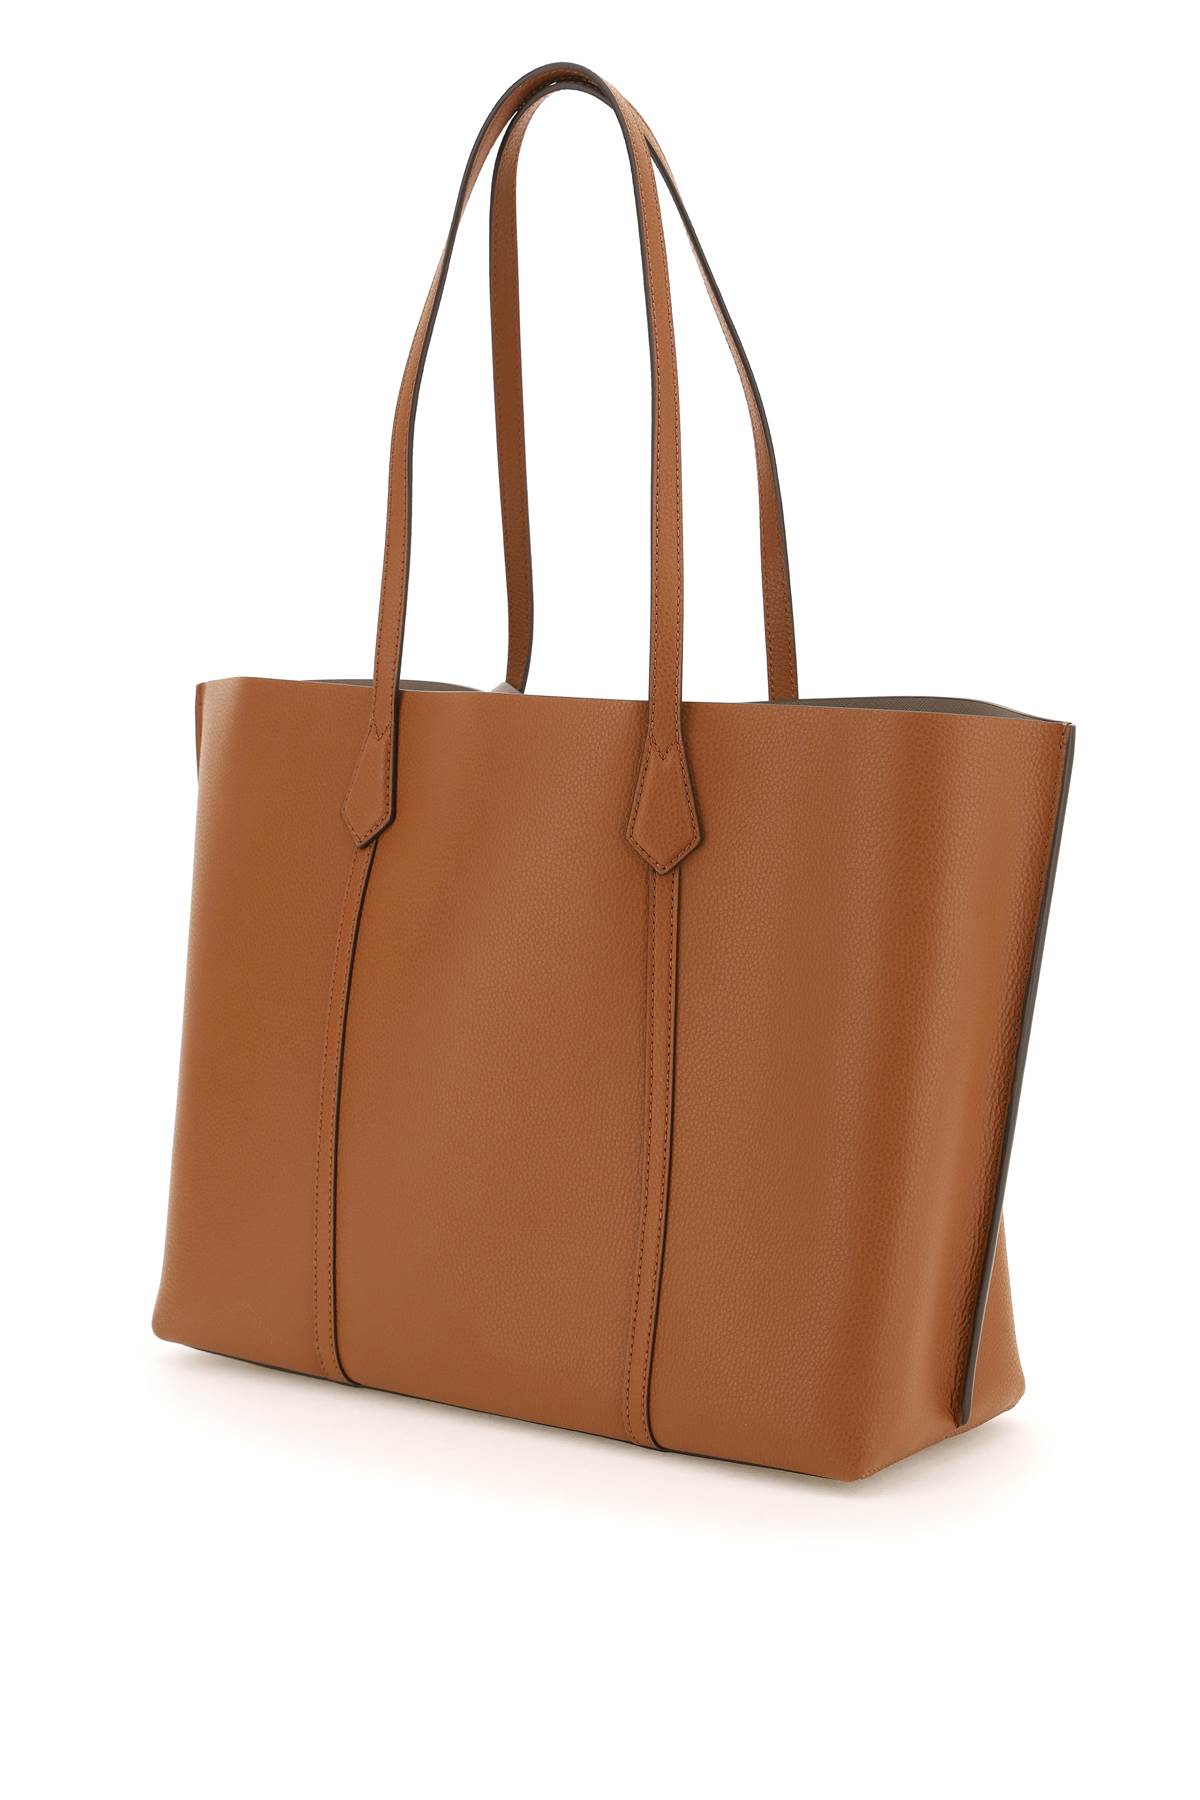 Shop Tory Burch Perry Shopping Bag In Light Umber (brown)